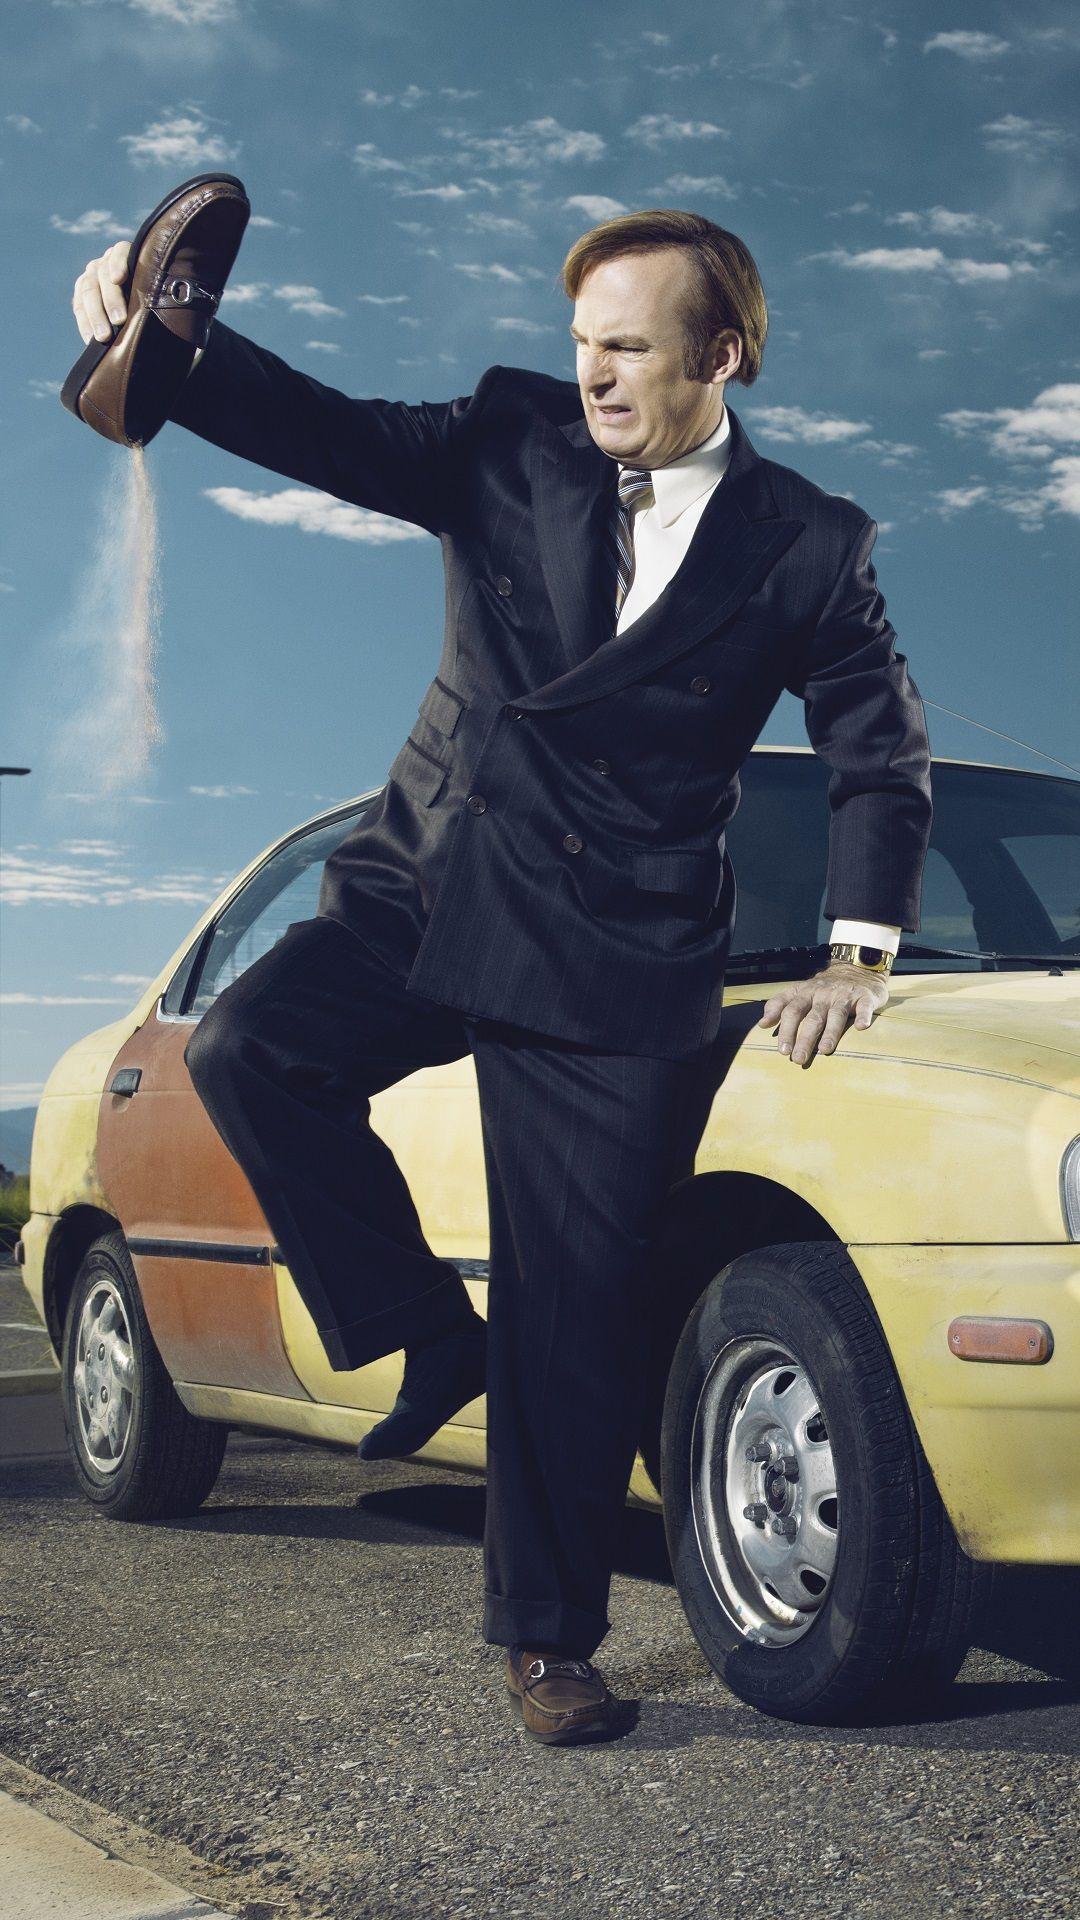 Better Call Saul Wallpaper For iPhone And iPad